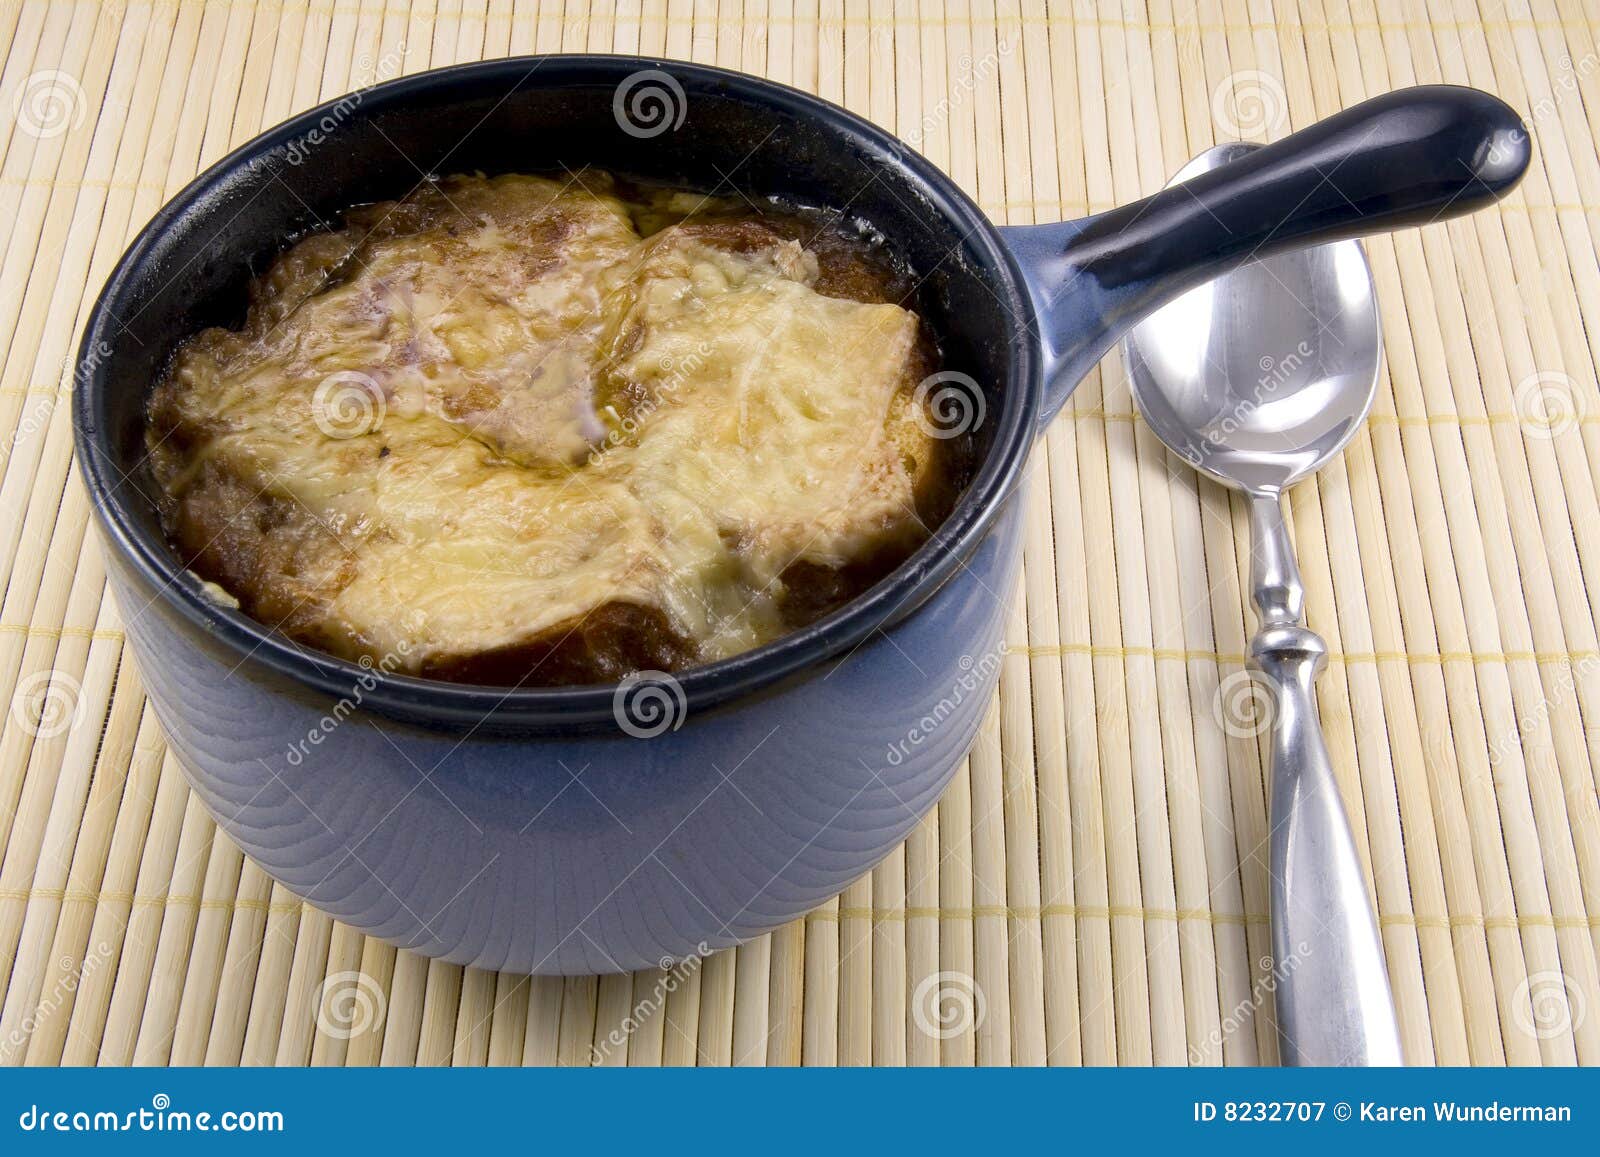 french onion soup in blue crock